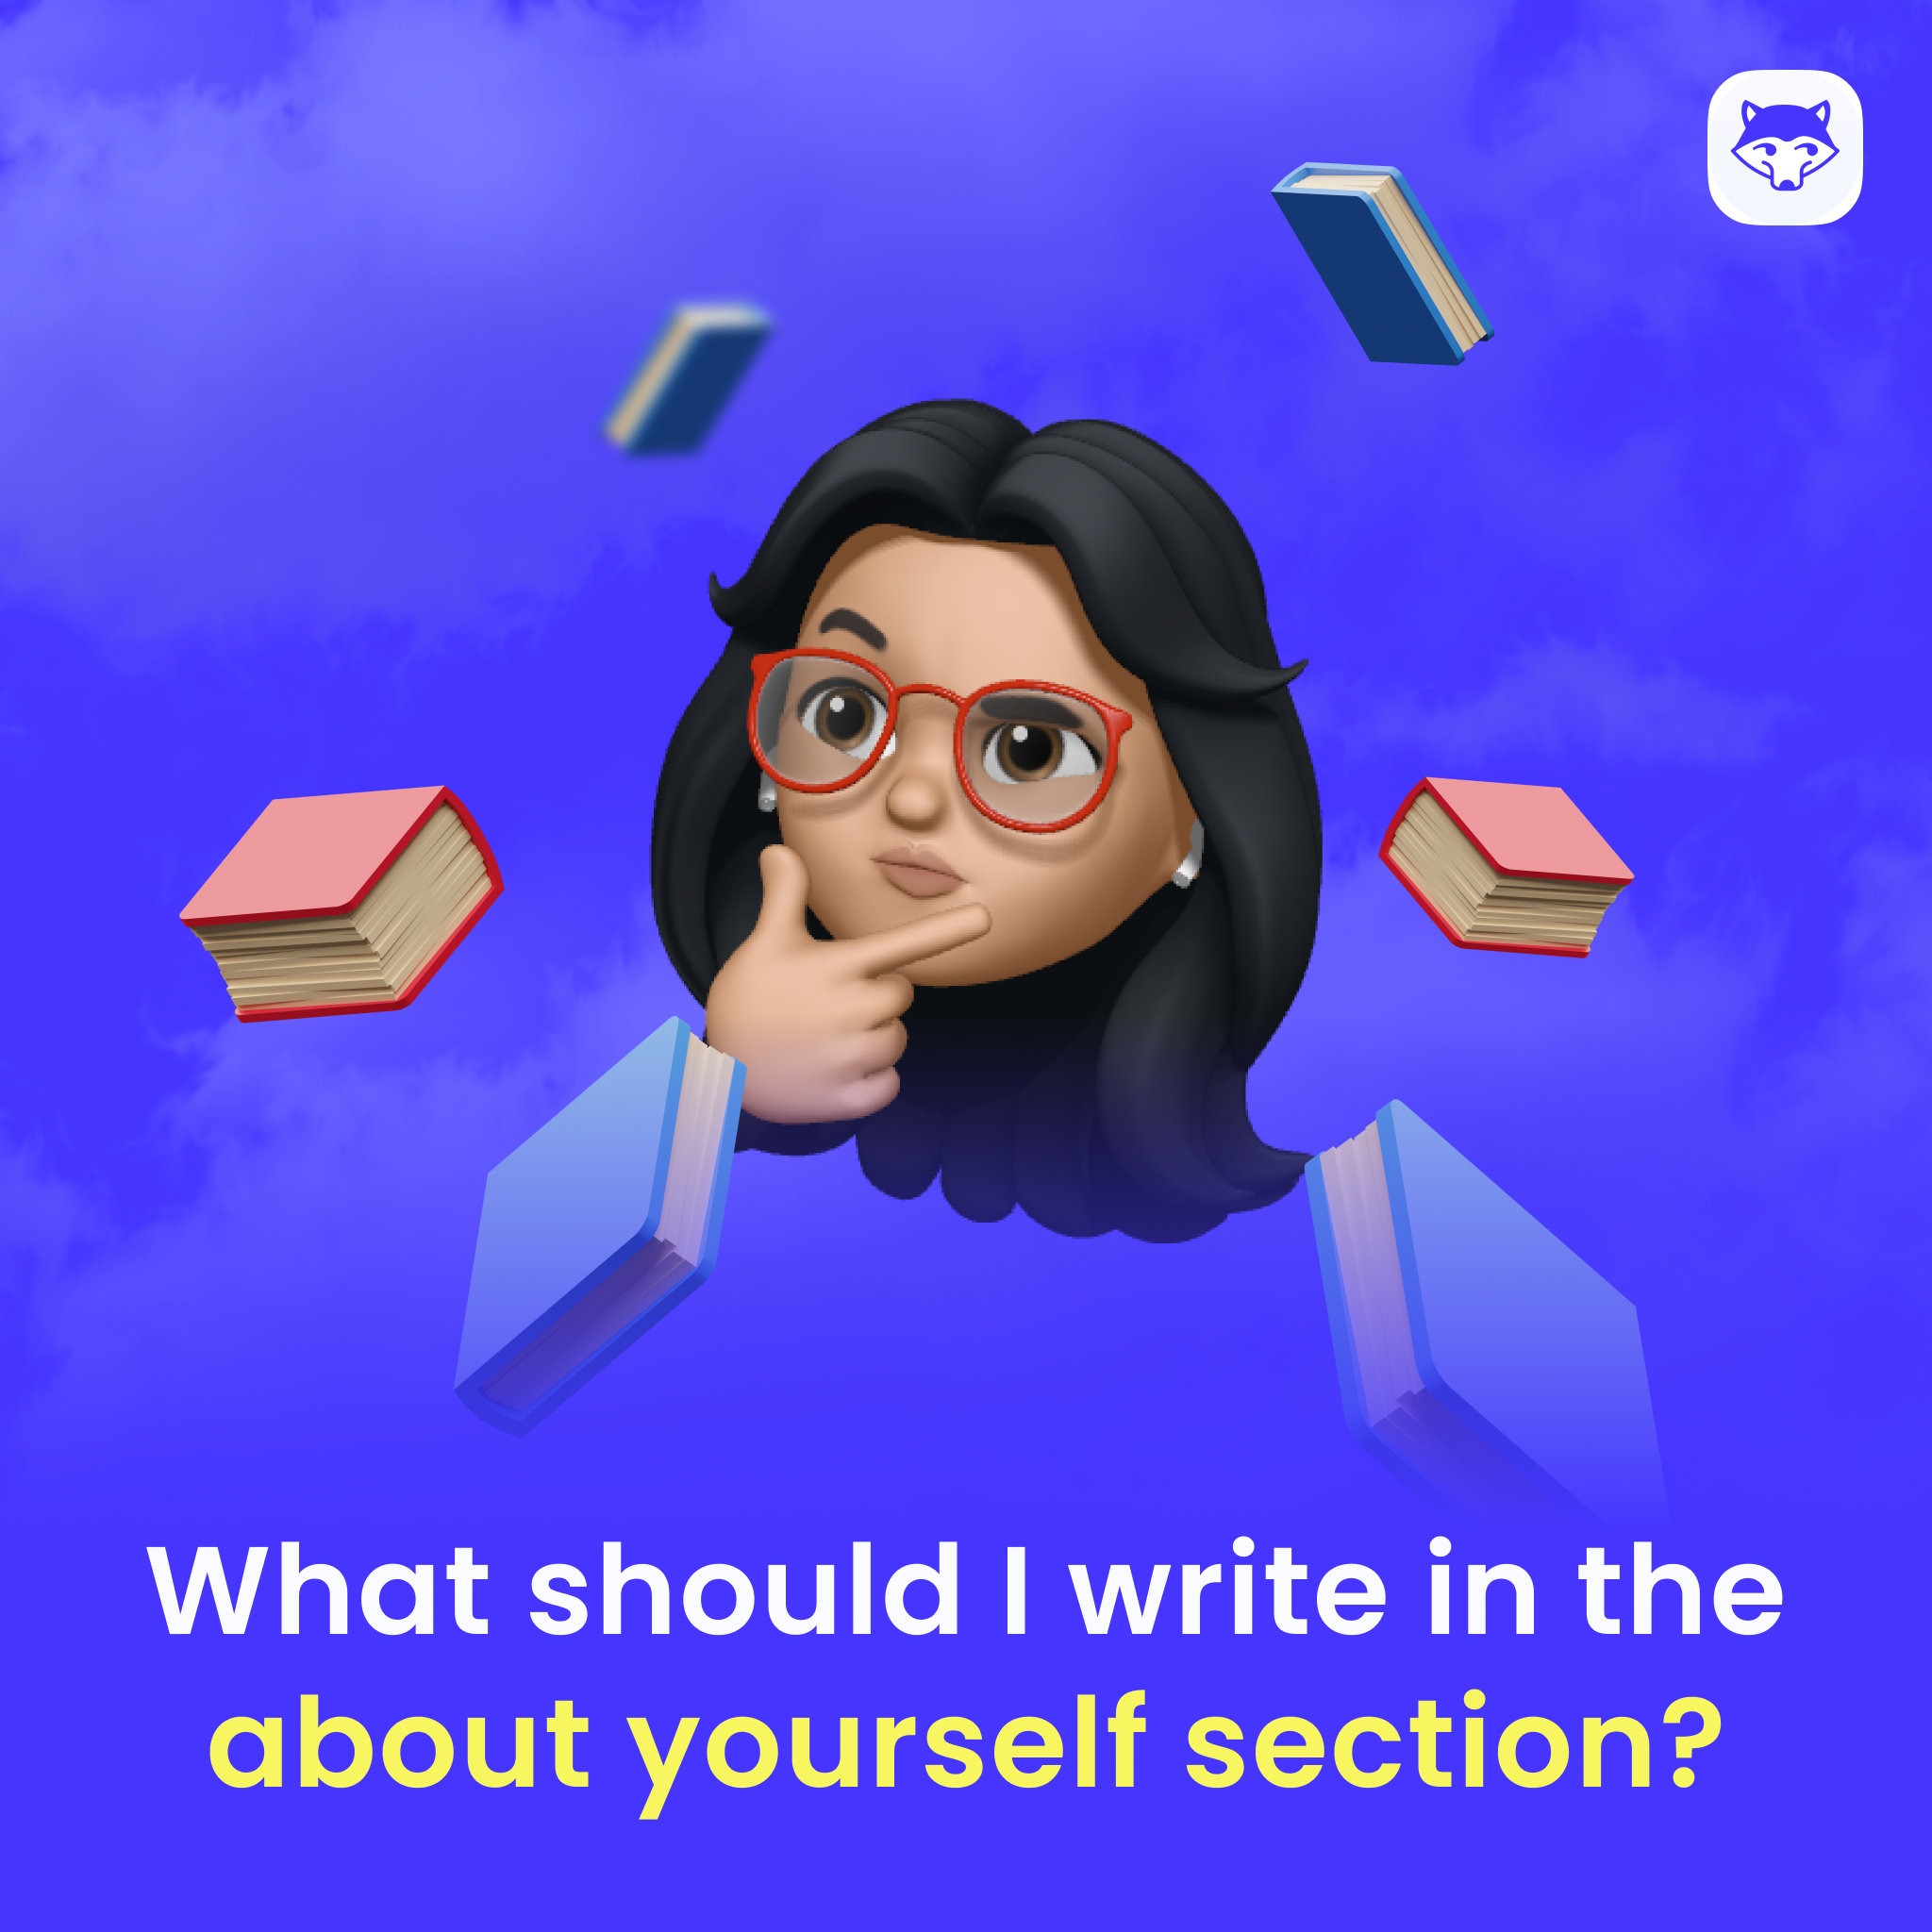 What should I write in the about yourself section